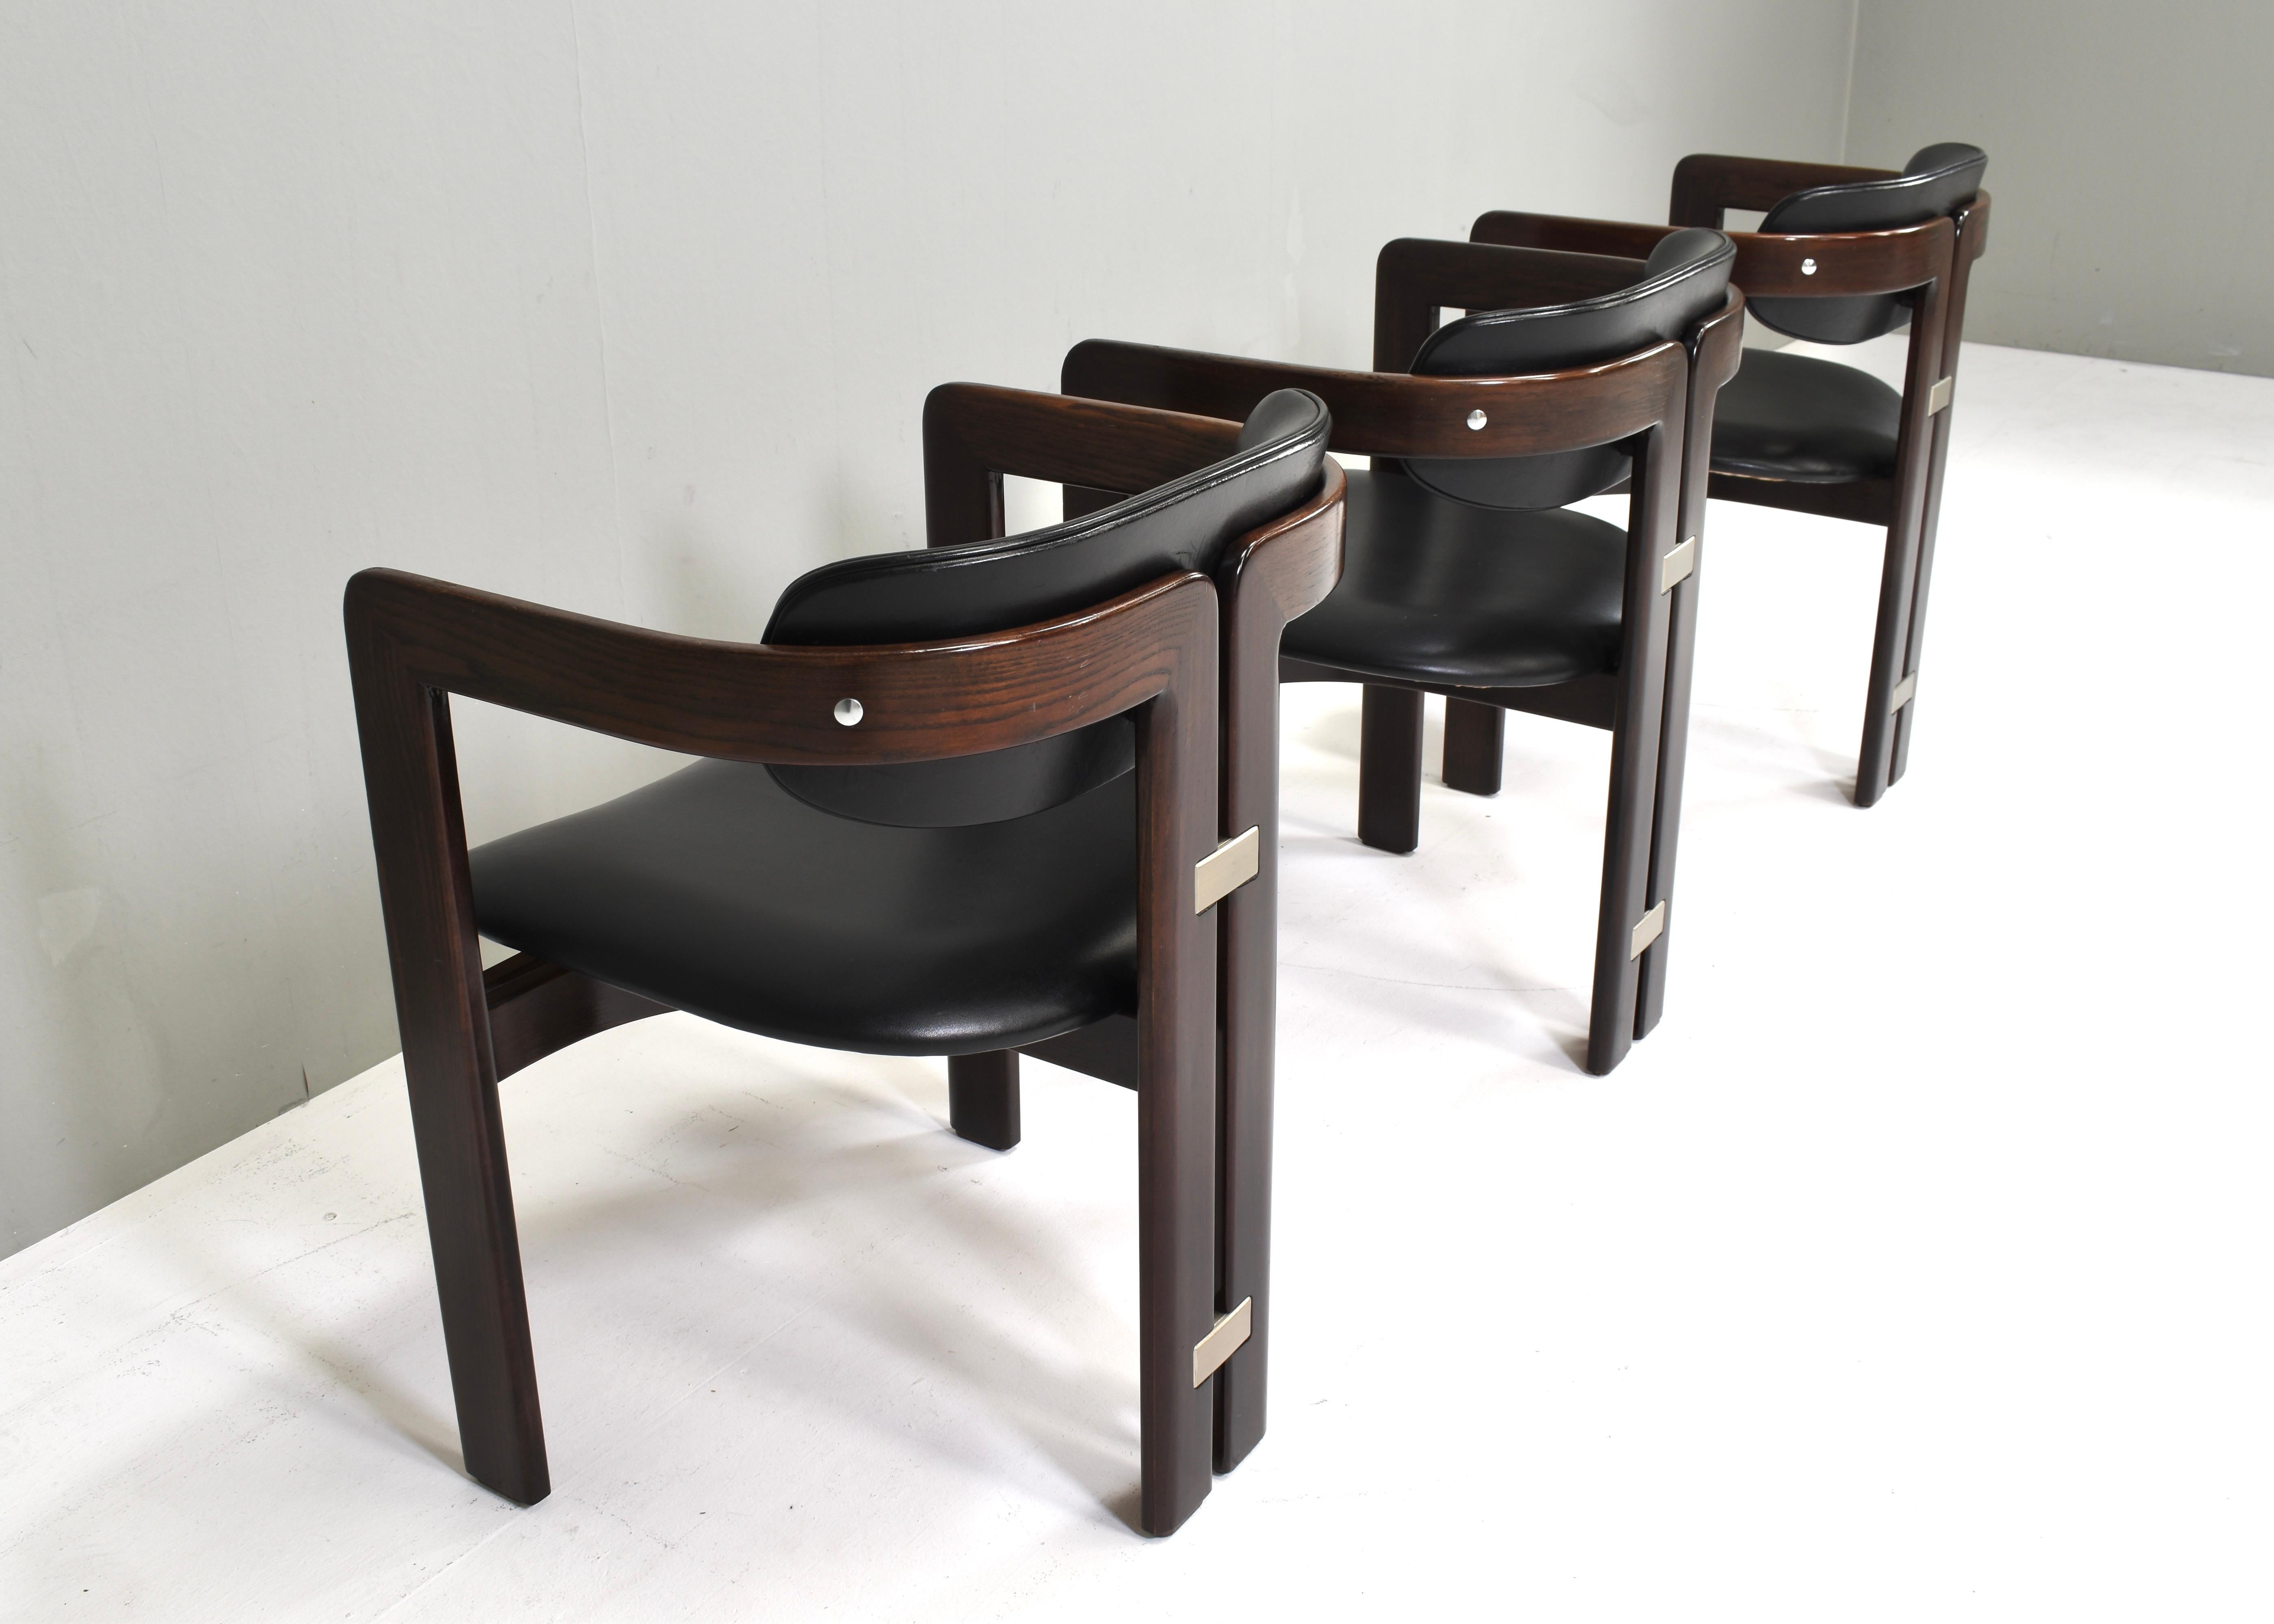 Pamplona Chairs by Augusti Savini in Black Leather - Italy, 1965, Set of 3  In Good Condition For Sale In Pijnacker, Zuid-Holland